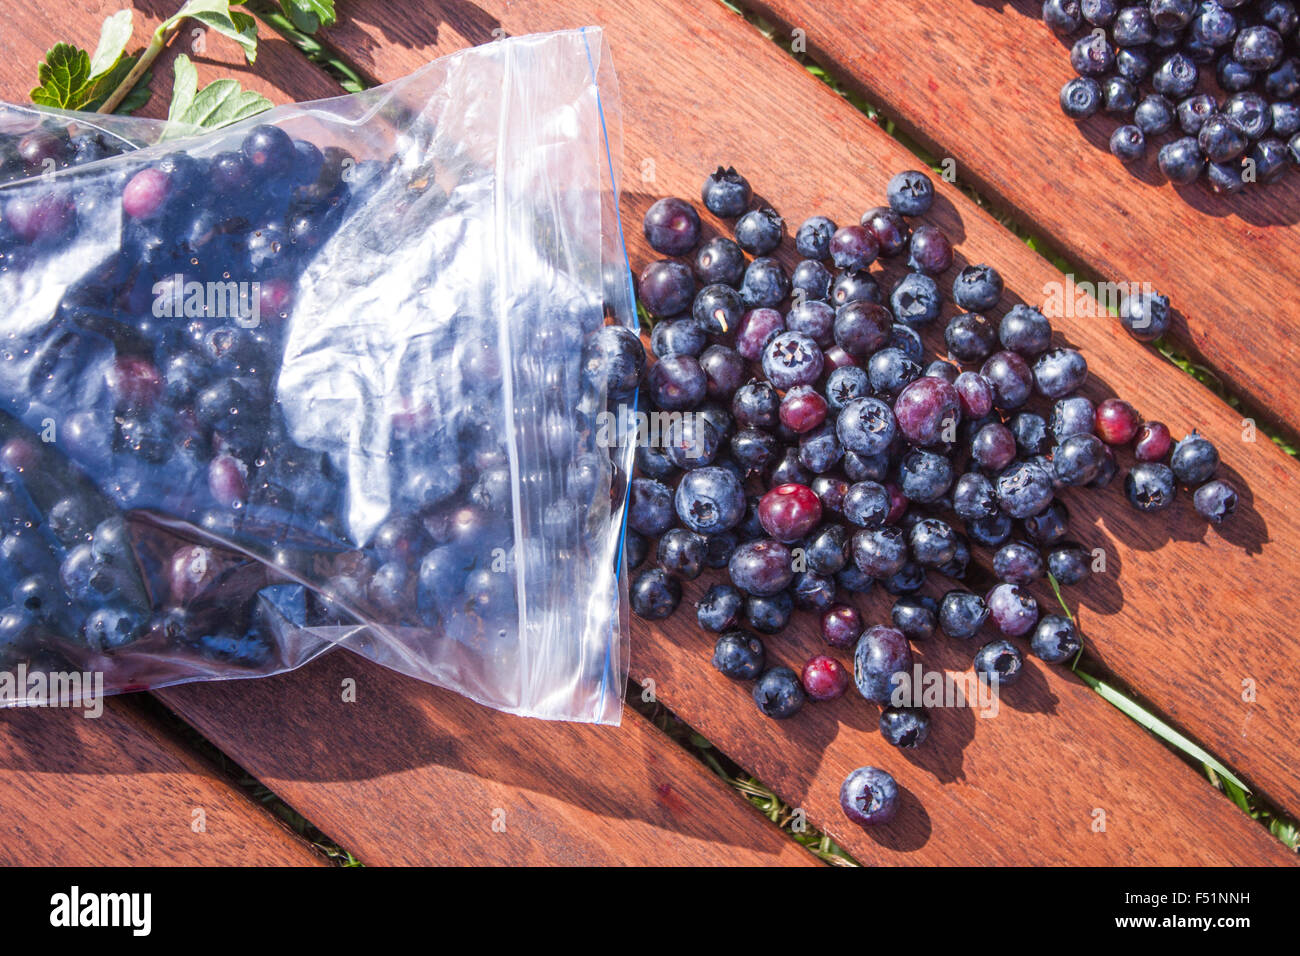 collecting huckleberries, vaccinium corymbosum, in a plastic bag, on wooden background Stock Photo